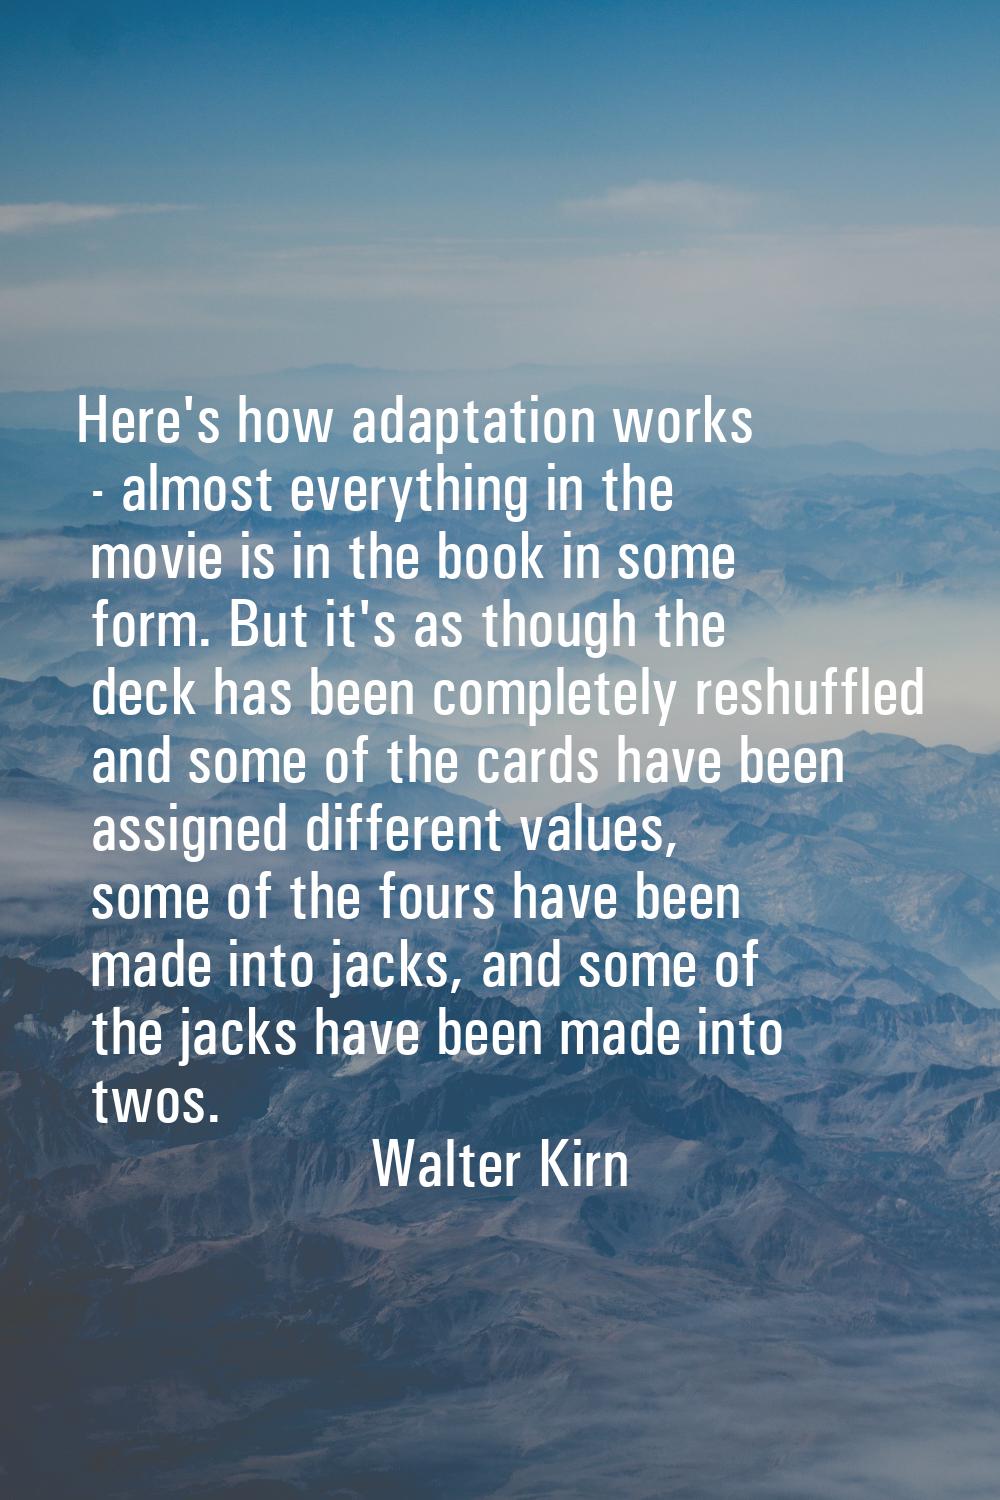 Here's how adaptation works - almost everything in the movie is in the book in some form. But it's 